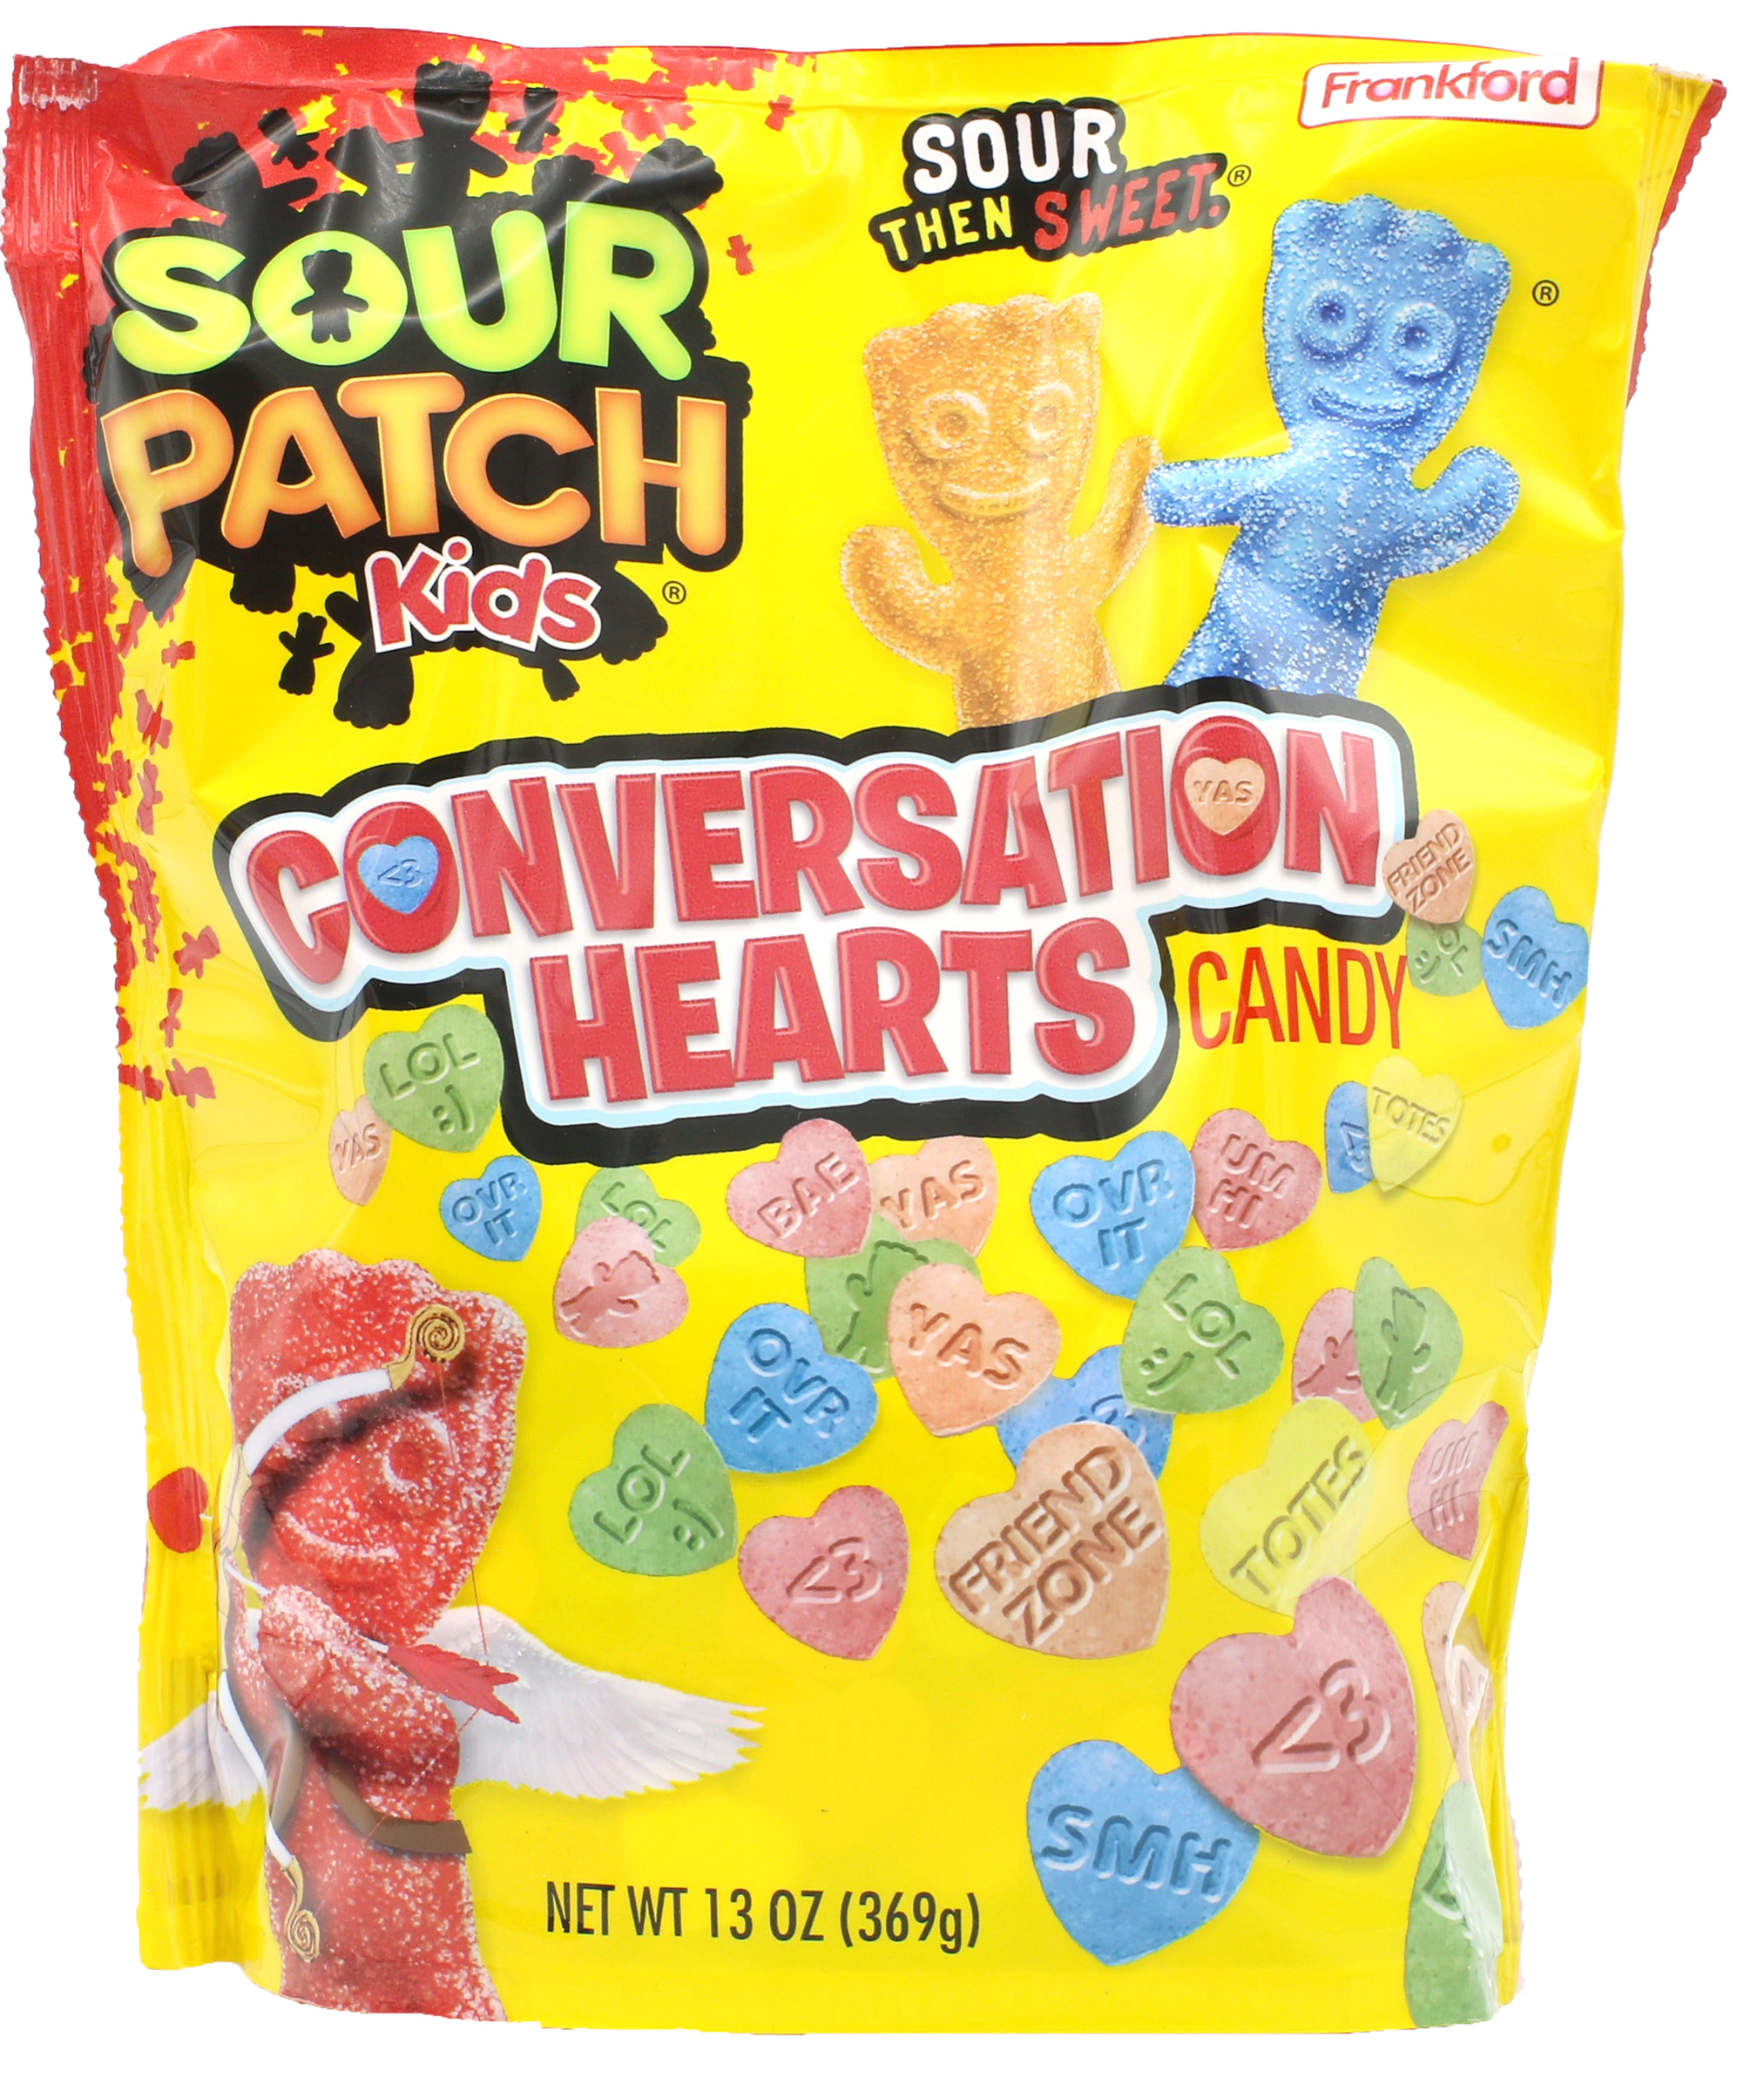 Frankford Sour Patch Candy Conversation Hearts, 13 Oz. - image 1 of 7